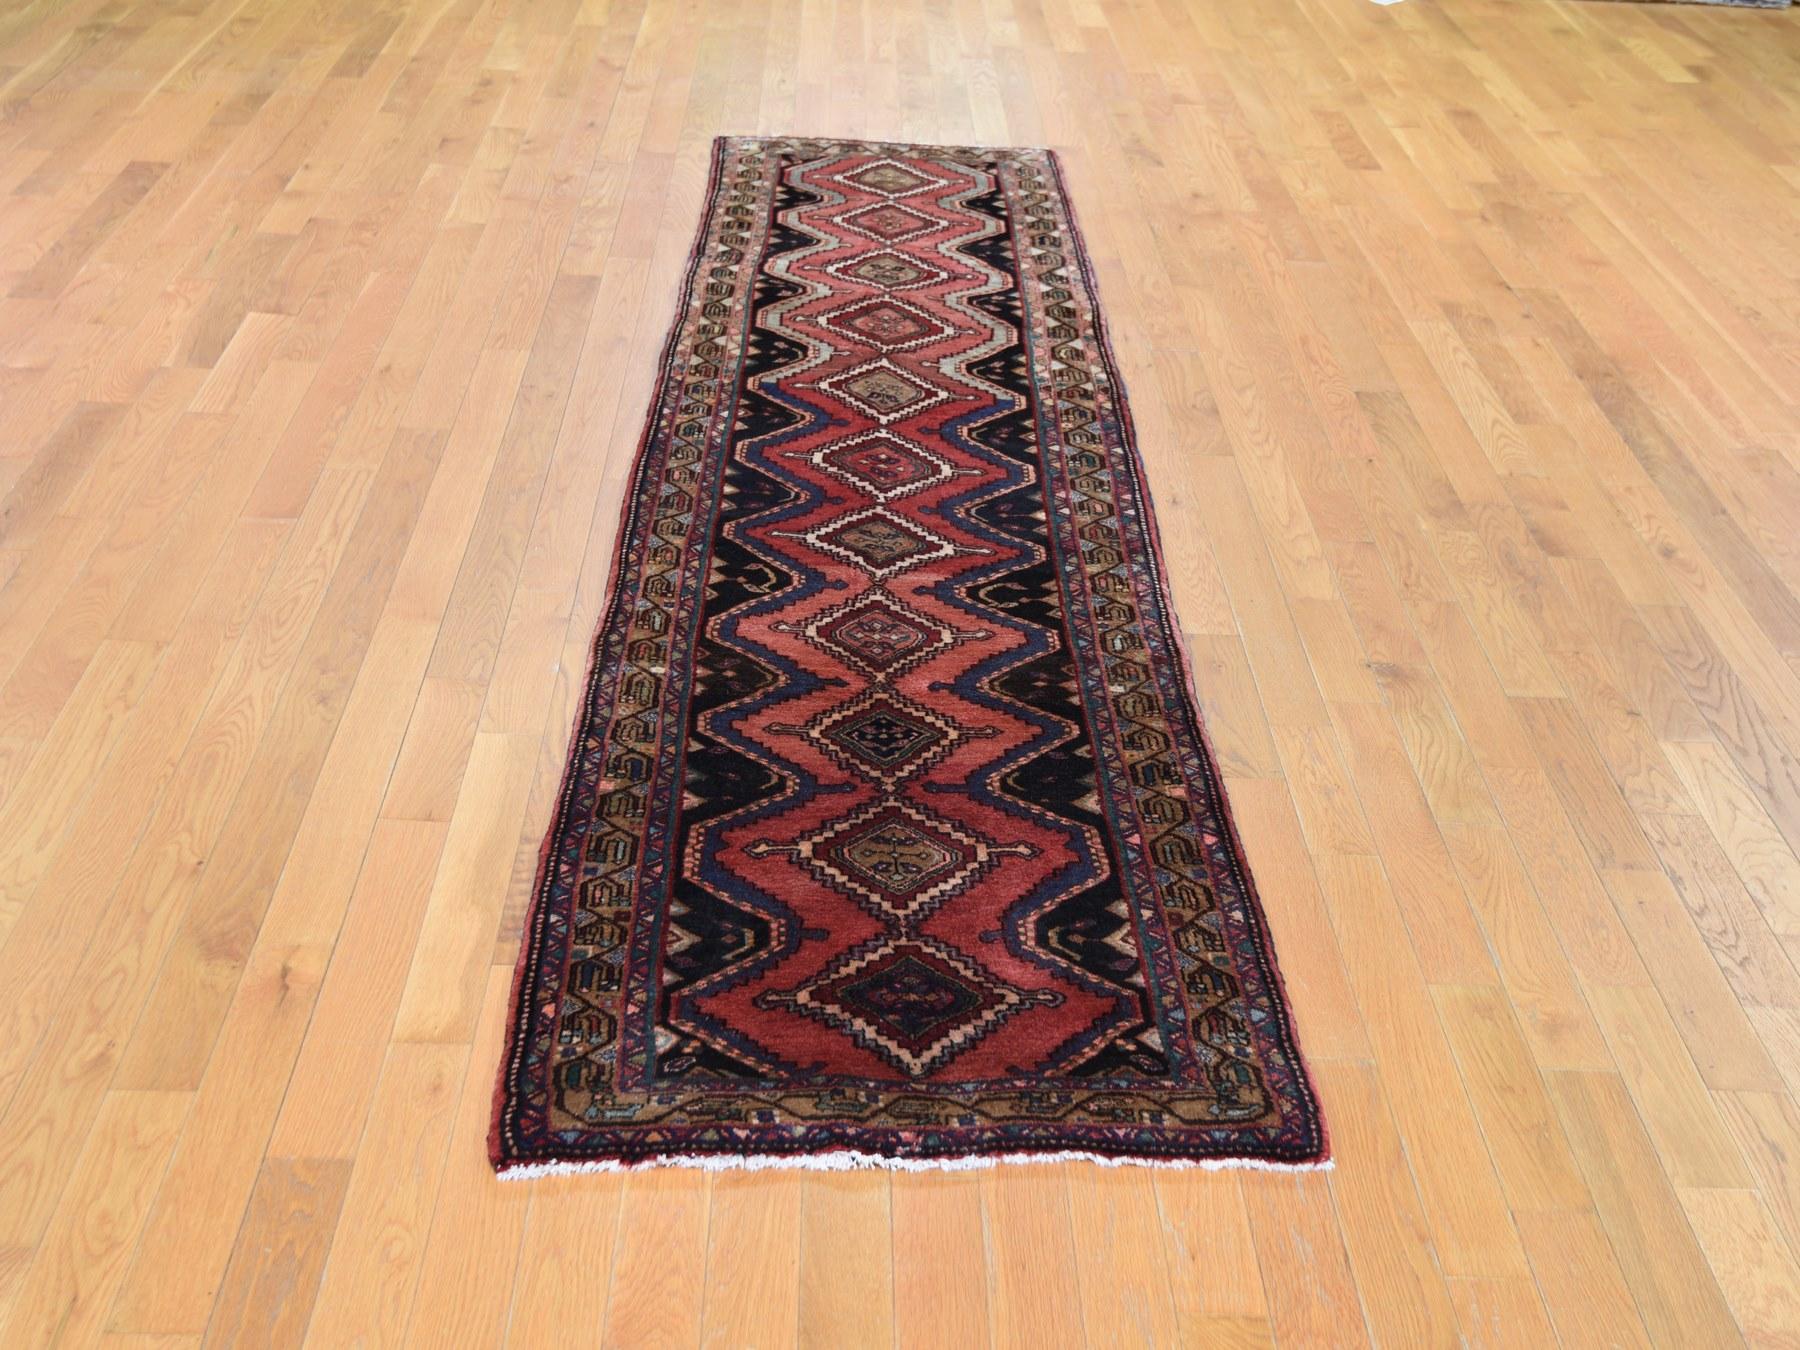 This fabulous Hand-Knotted carpet has been created and designed for extra strength and durability. This rug has been handcrafted for weeks in the traditional method that is used to make Rugs. This is truly a one-of-kind piece. 
Exact rug size in